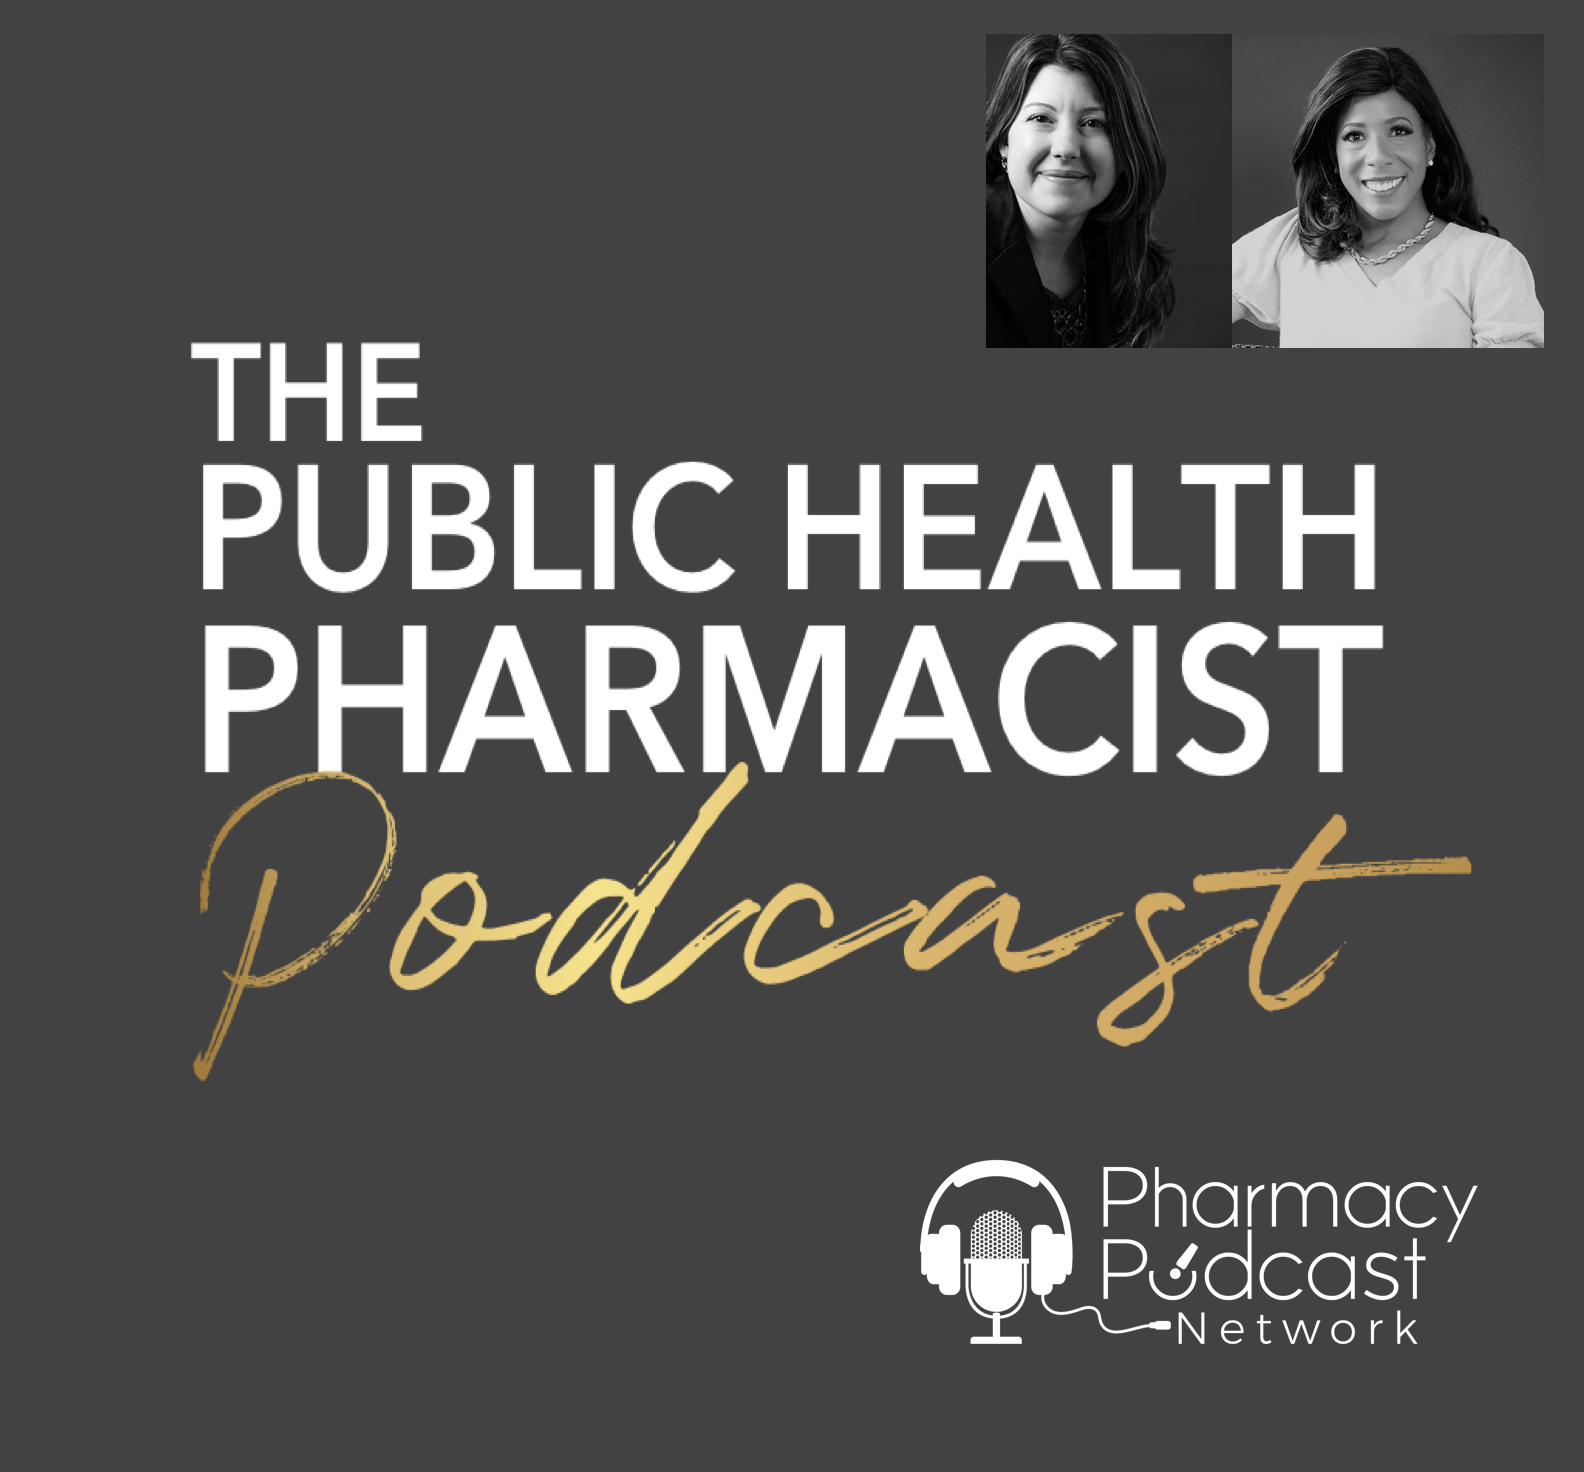 Mentoring in the 21st Century - Why Training the Next Generation of Pharmacy Professionals Helps Us Improve the Healthcare System and Advance the Profession | Public Health Pharmacist